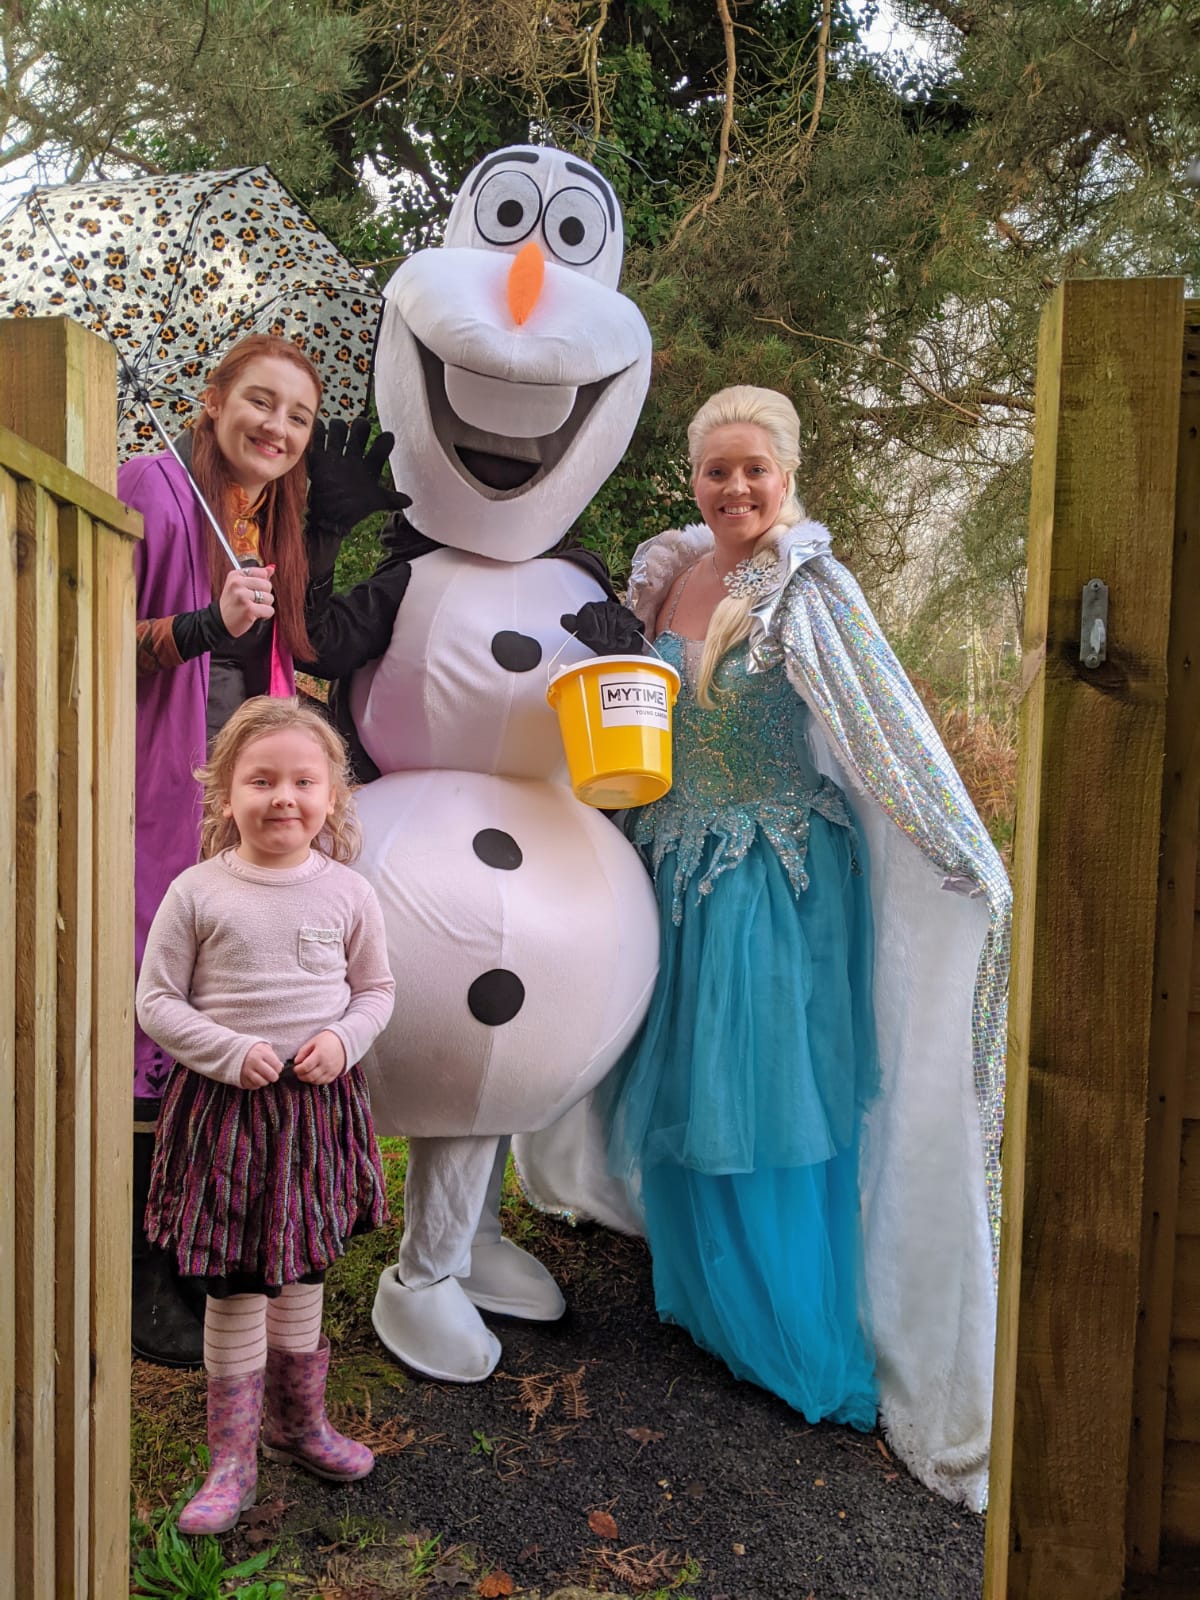 Frozen characters bring festive joy to youngsters across Dorset and raise funds for MYTIME Young Carers’ Charity!